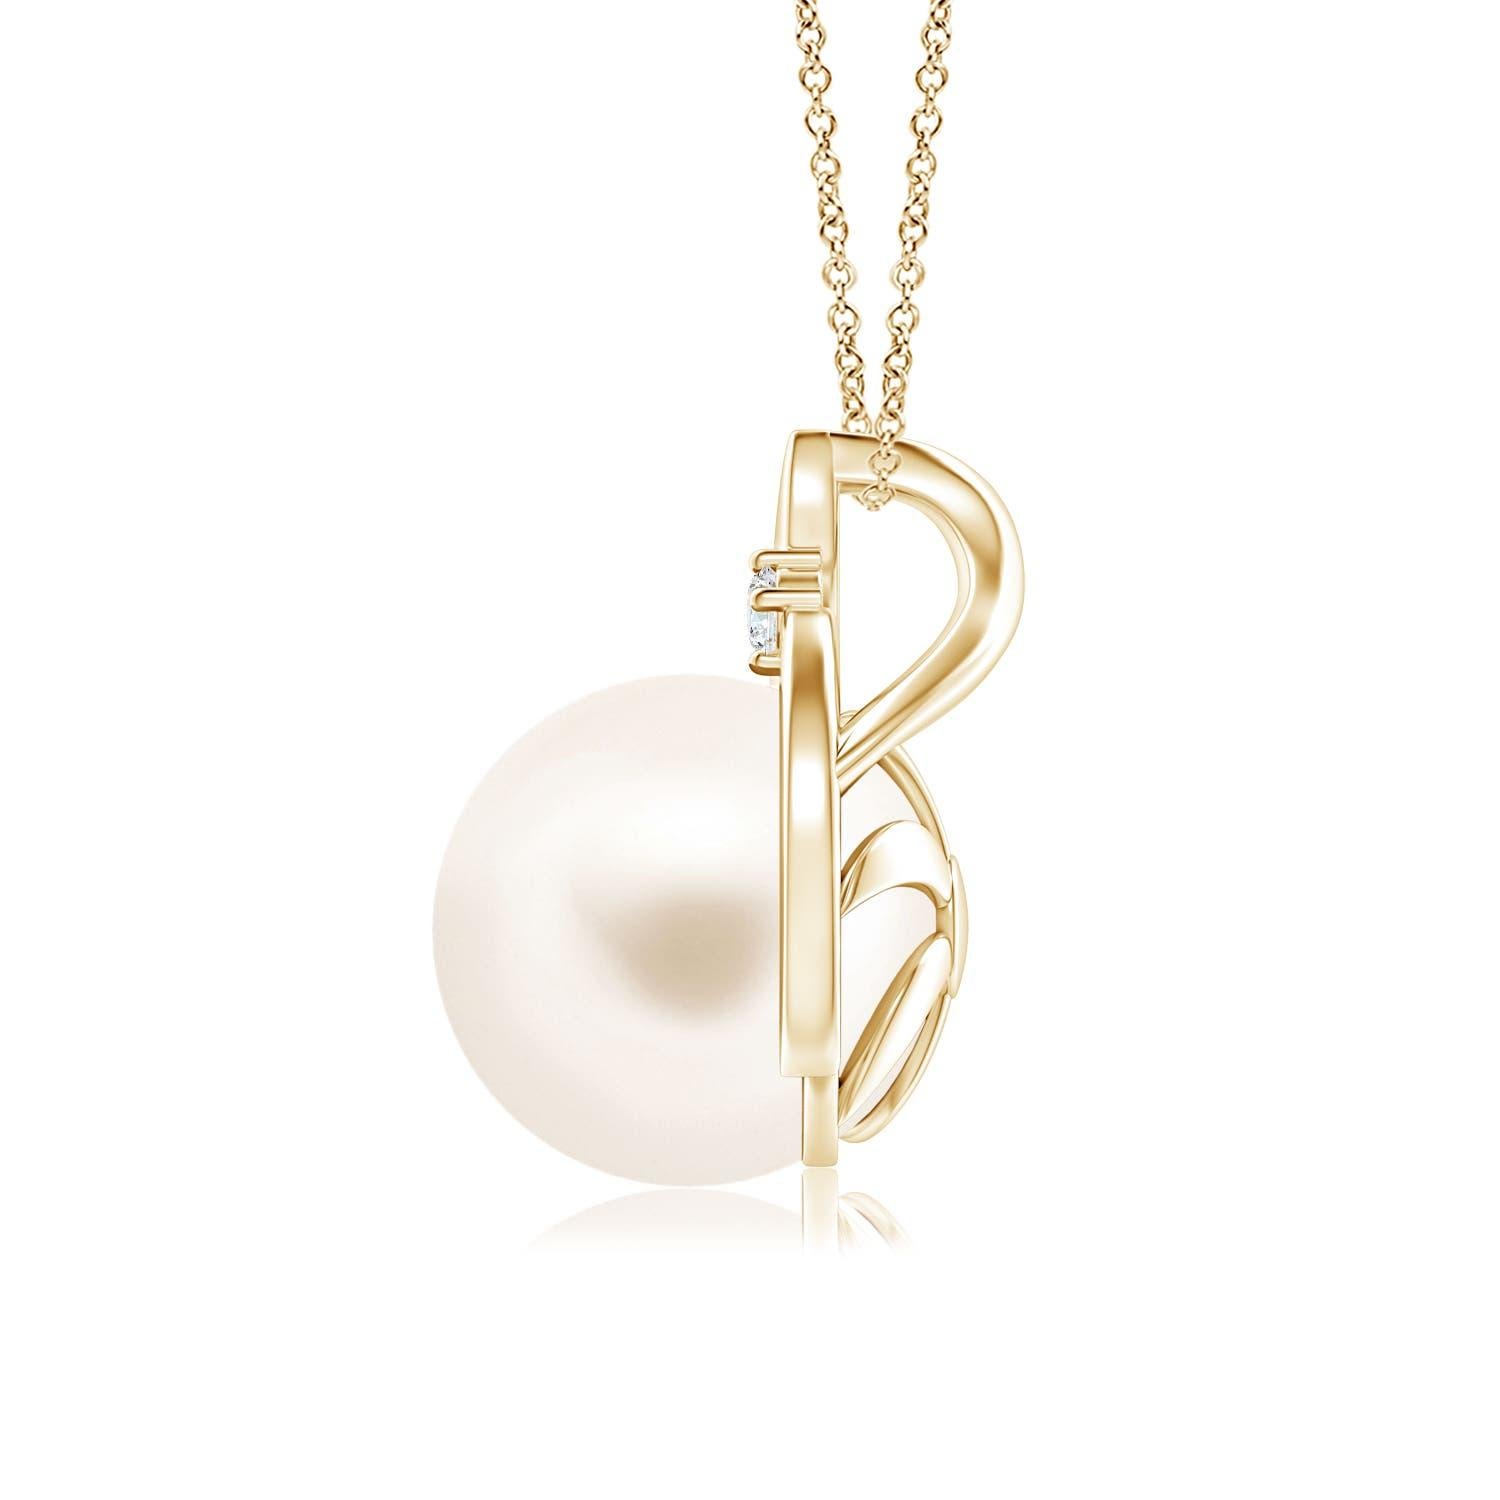 A modern take on the vintage wishbone pattern, this pearl pendant necklace in 14K yellow gold is designed to evoke an old-world charm. The intricately set Freshwater cultured pearl looks breathtakingly beautiful. Uniquely designed bale lends a touch